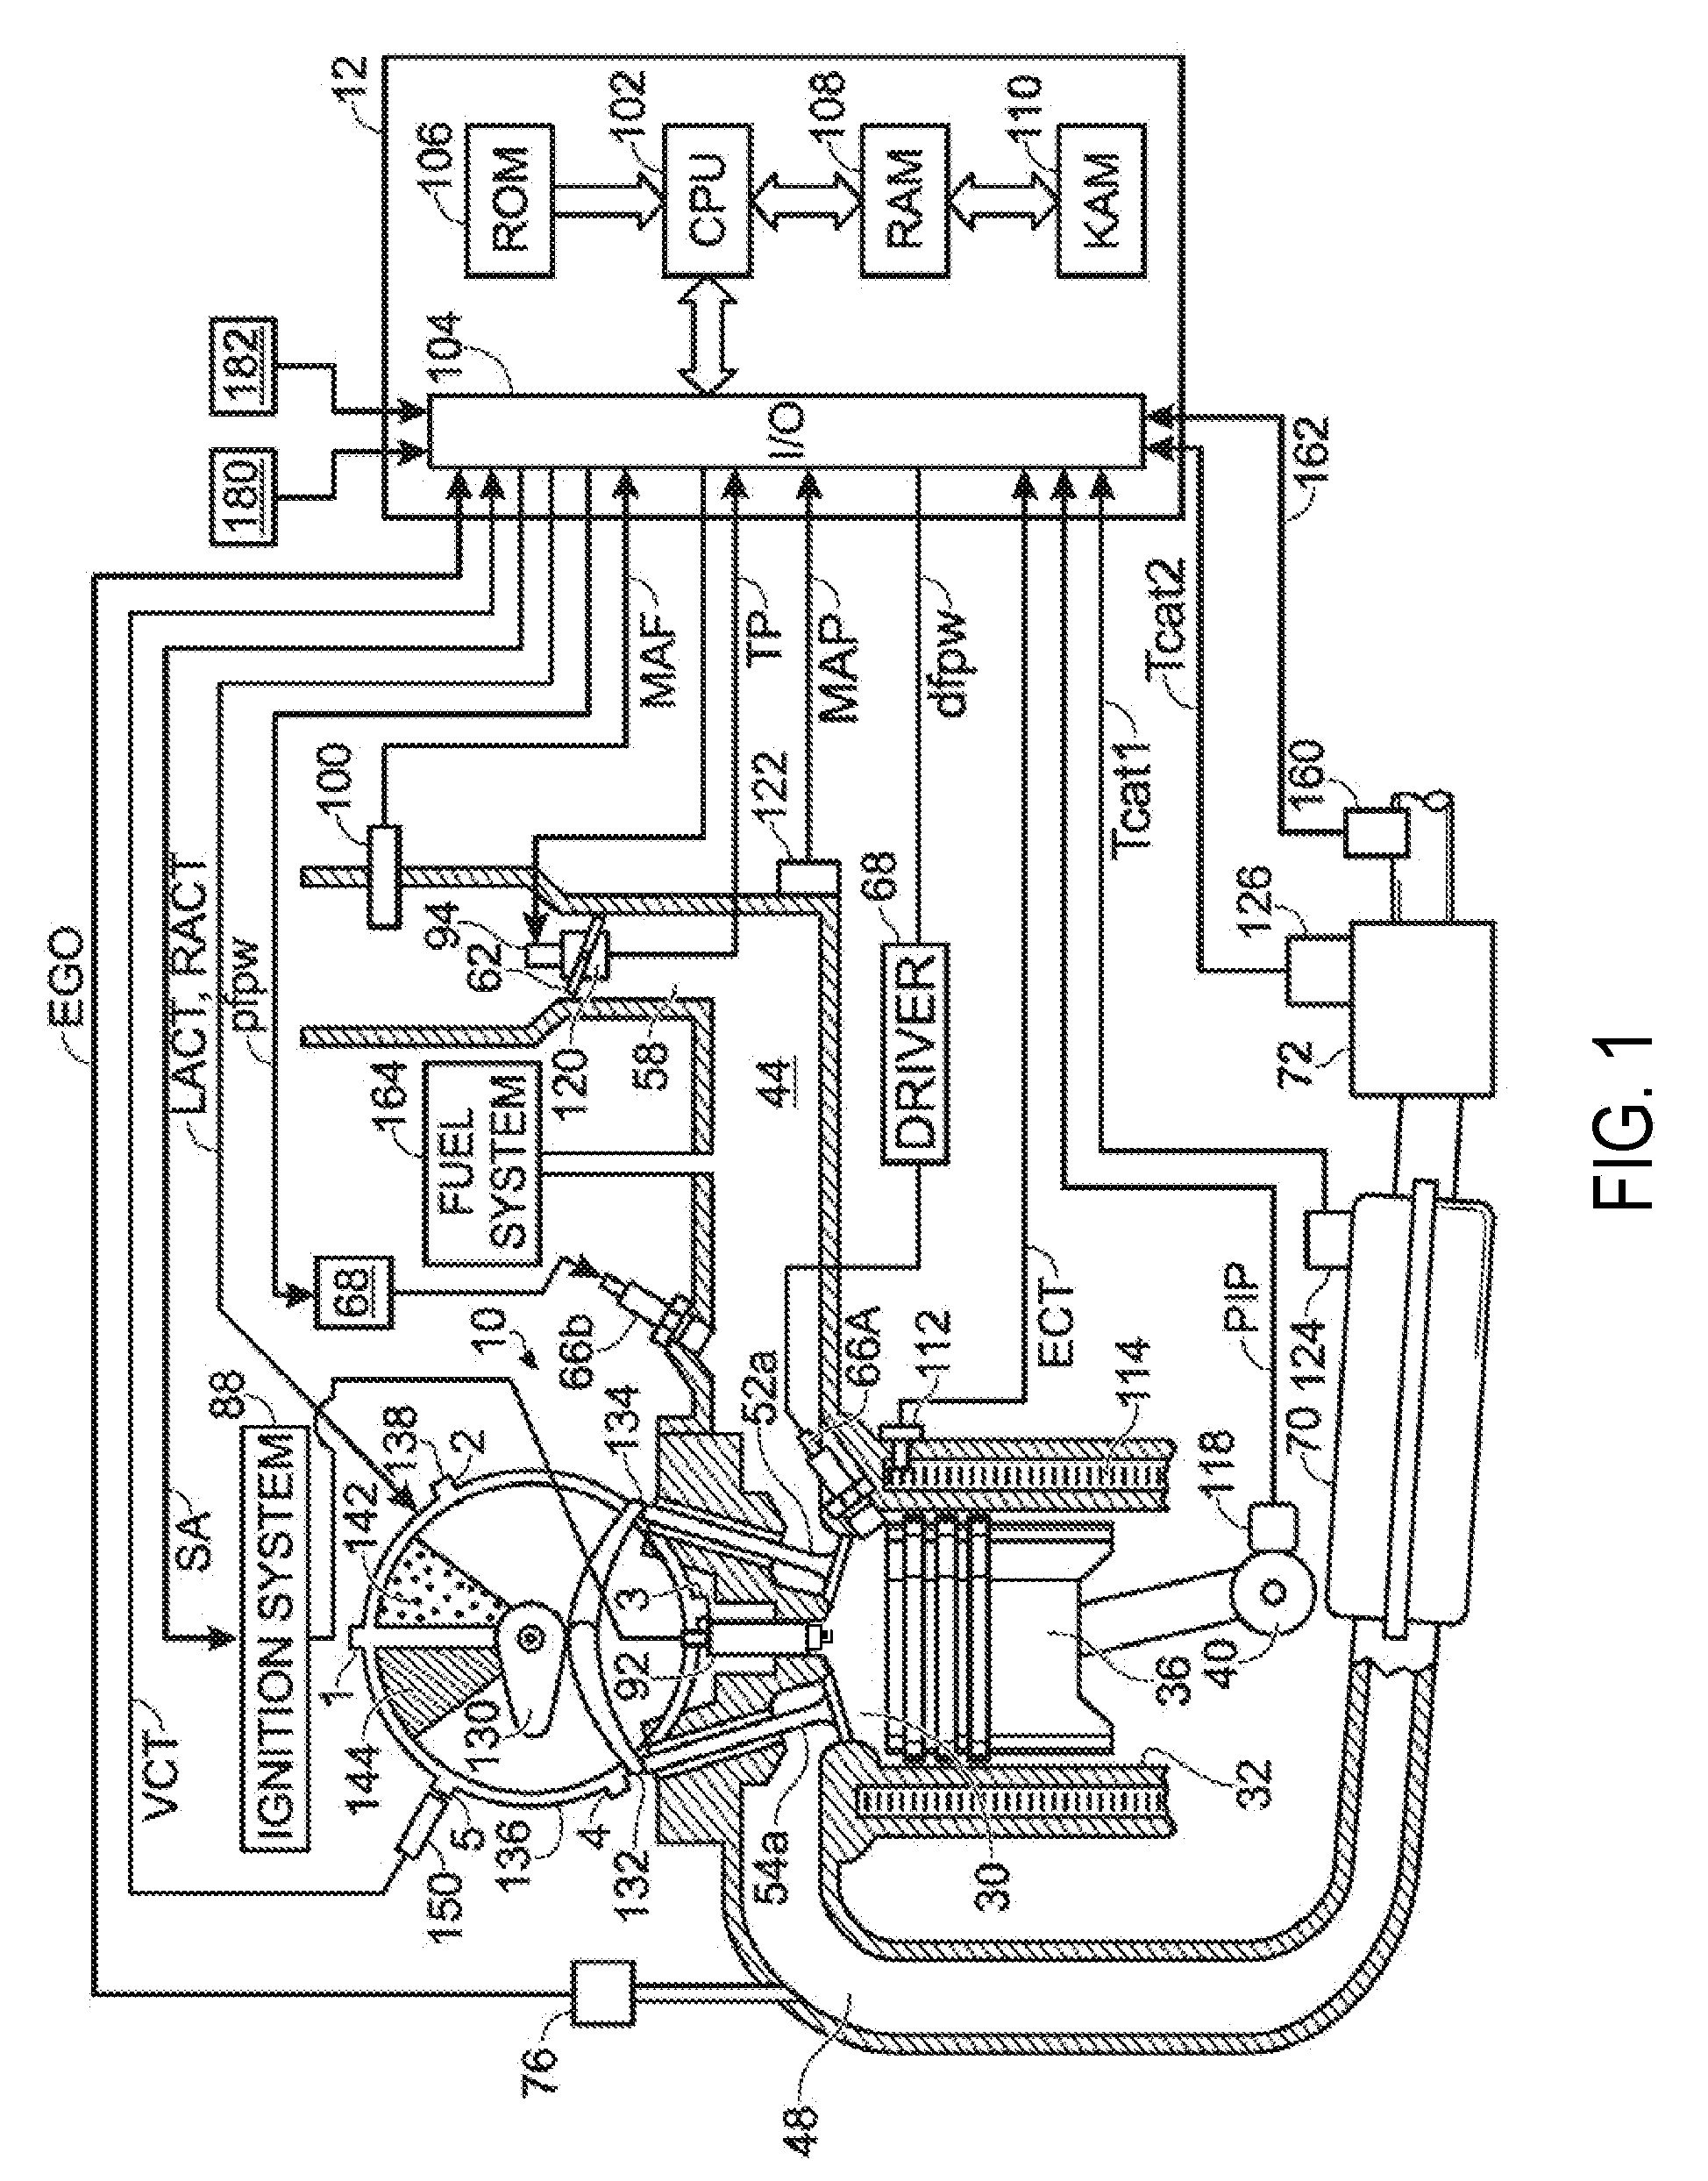 Approach for enhancing emissions control device warmup in a direct injection engine system